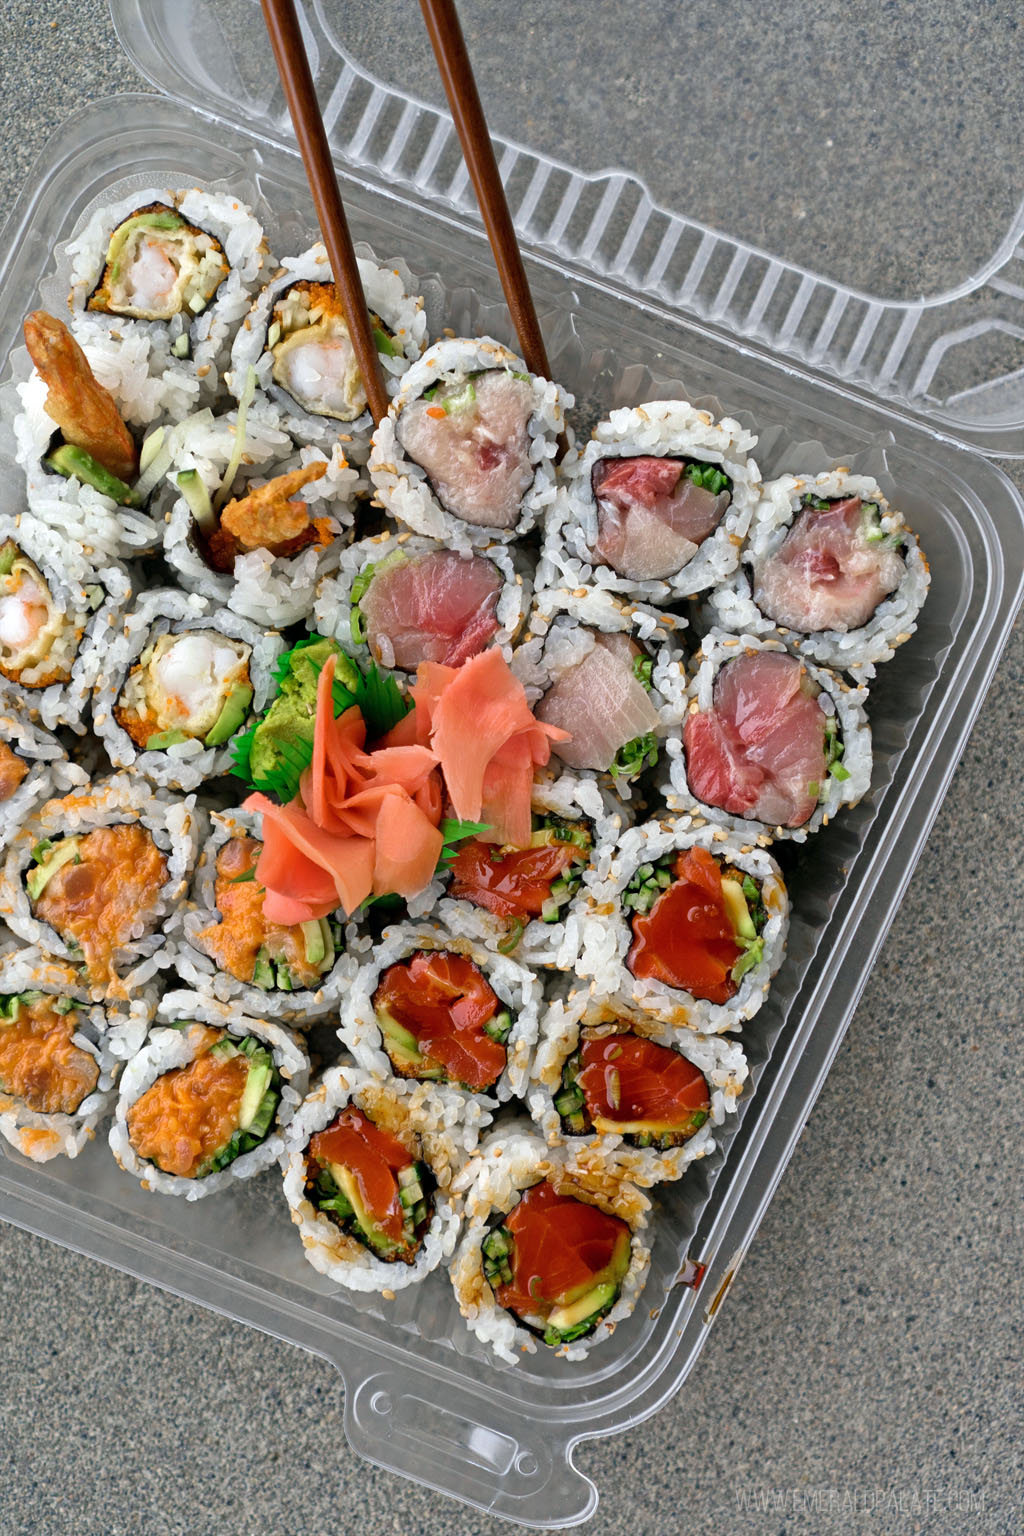 takeout container of sushi rolls from one of the best sushi restaurants in Seattle